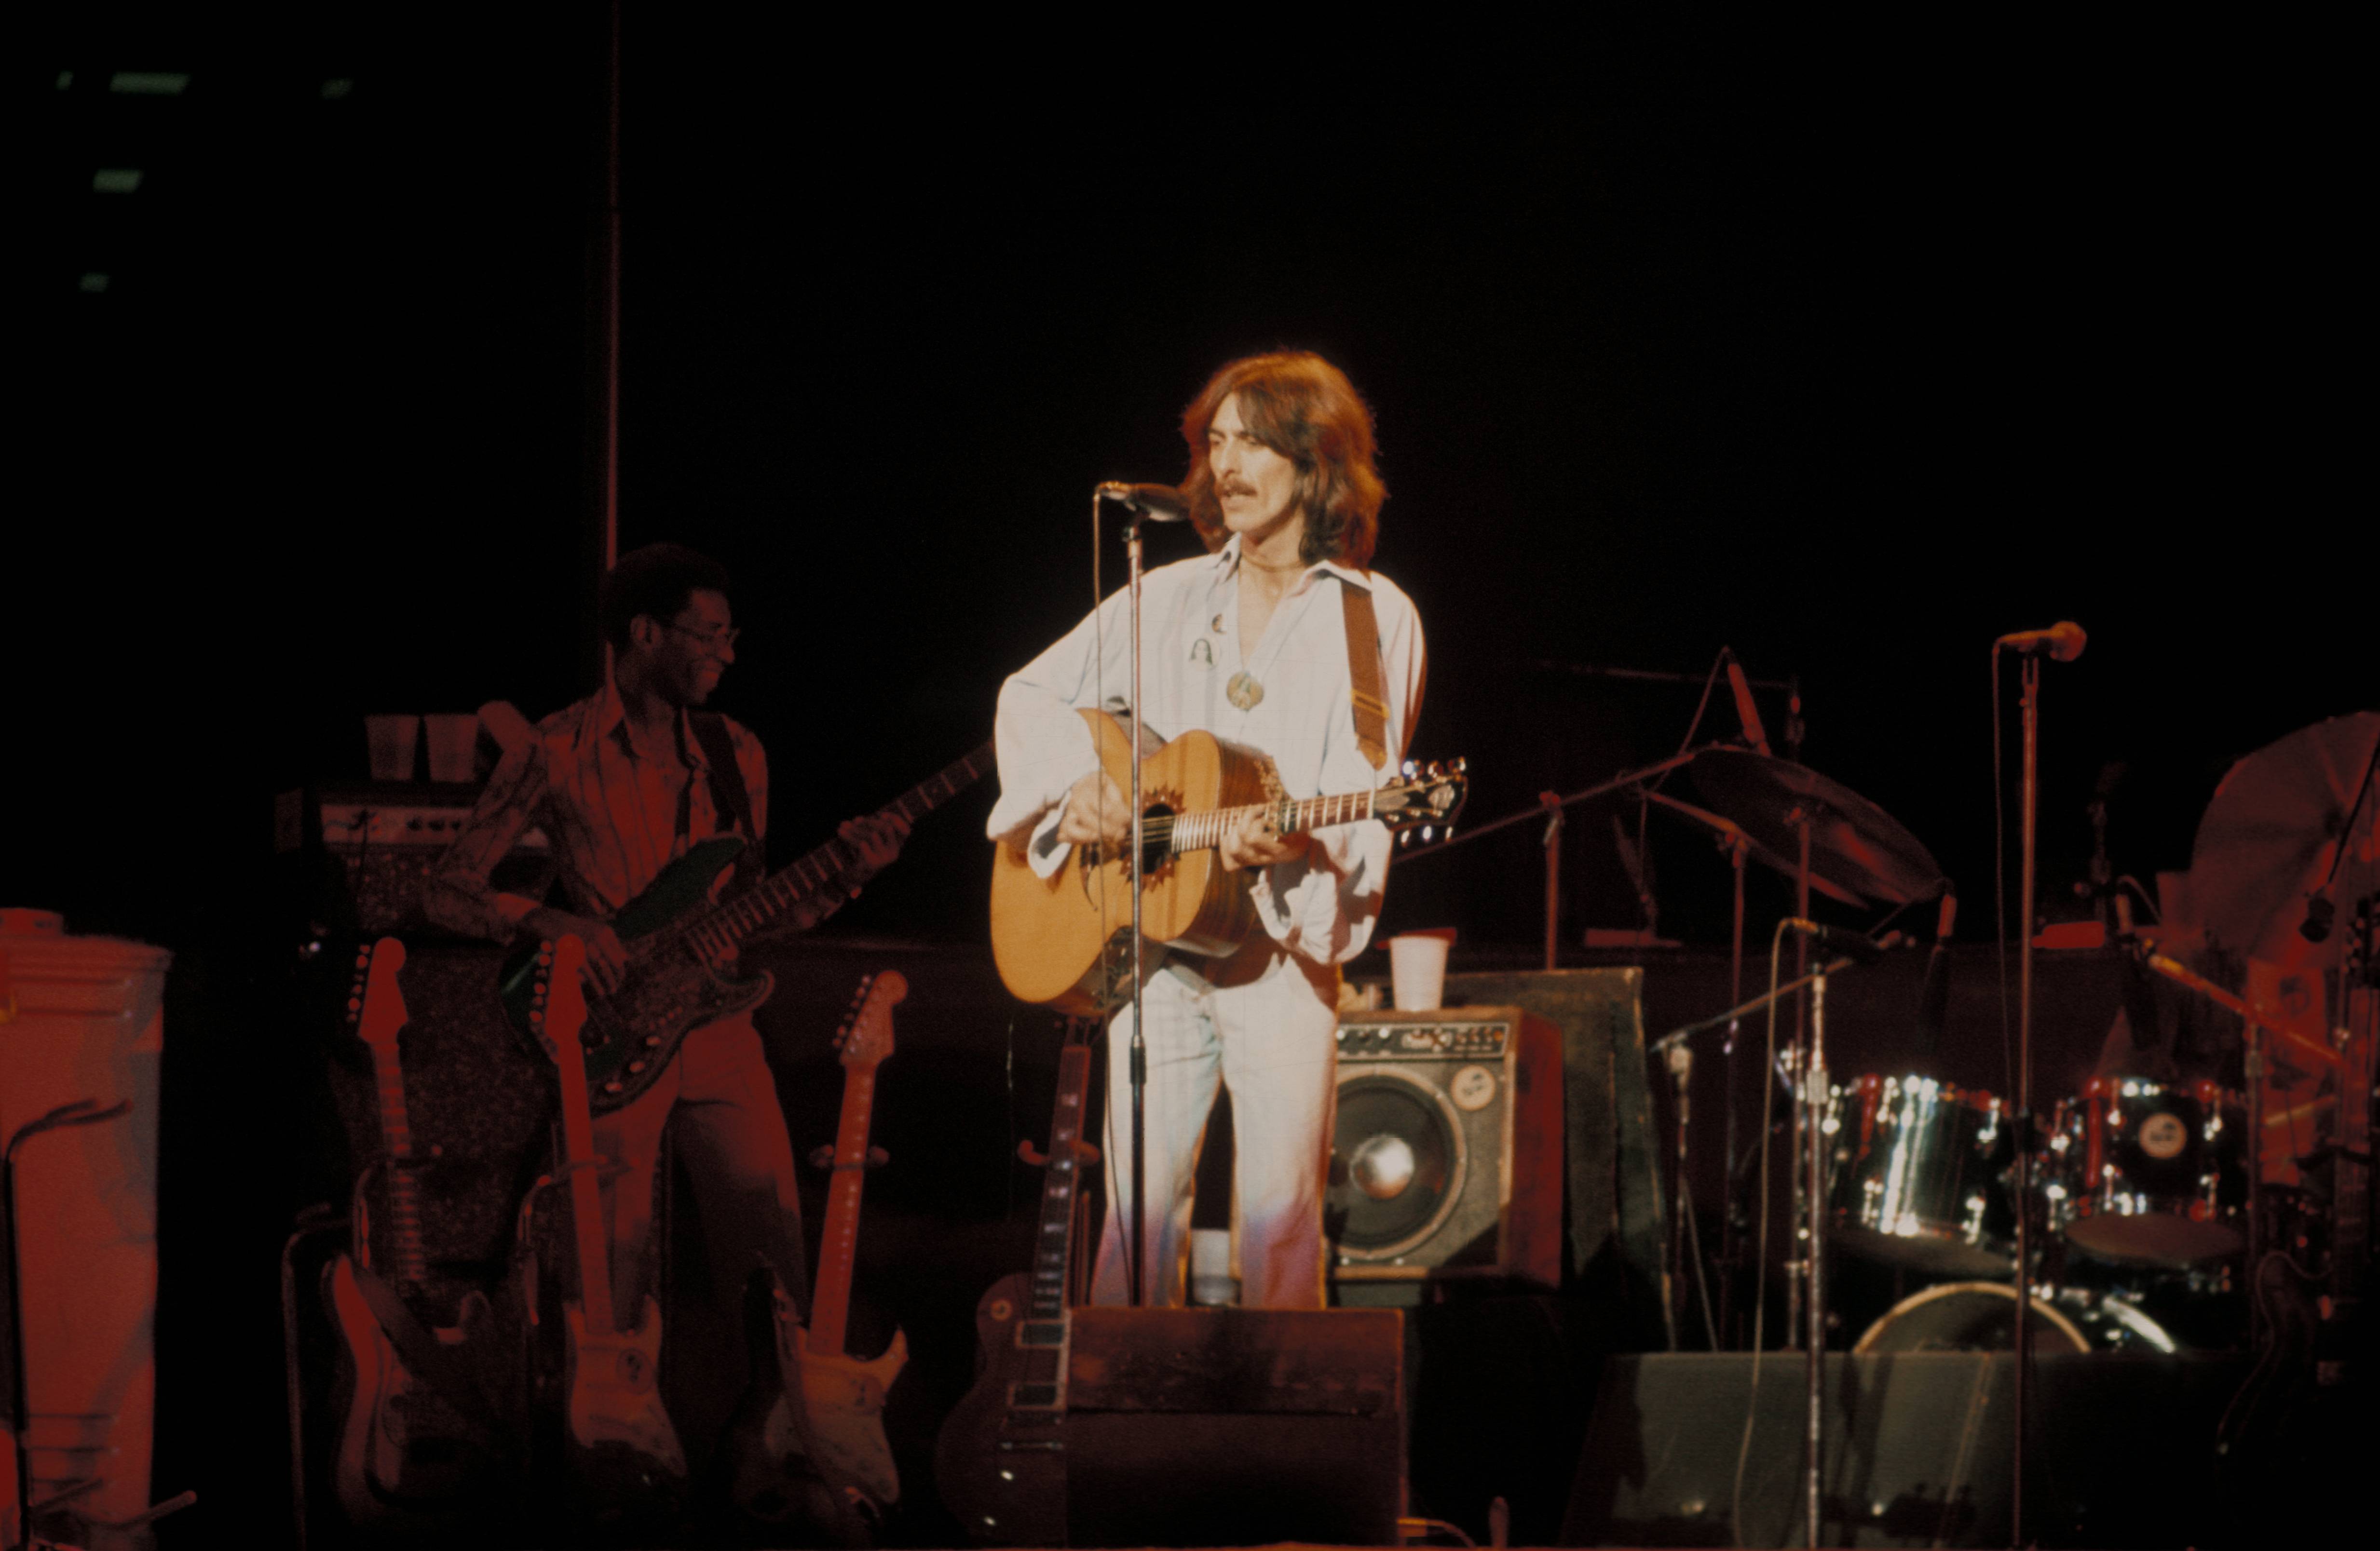 George Harrison performing live onstage on Dark Horse tour, playing acoustic guitar